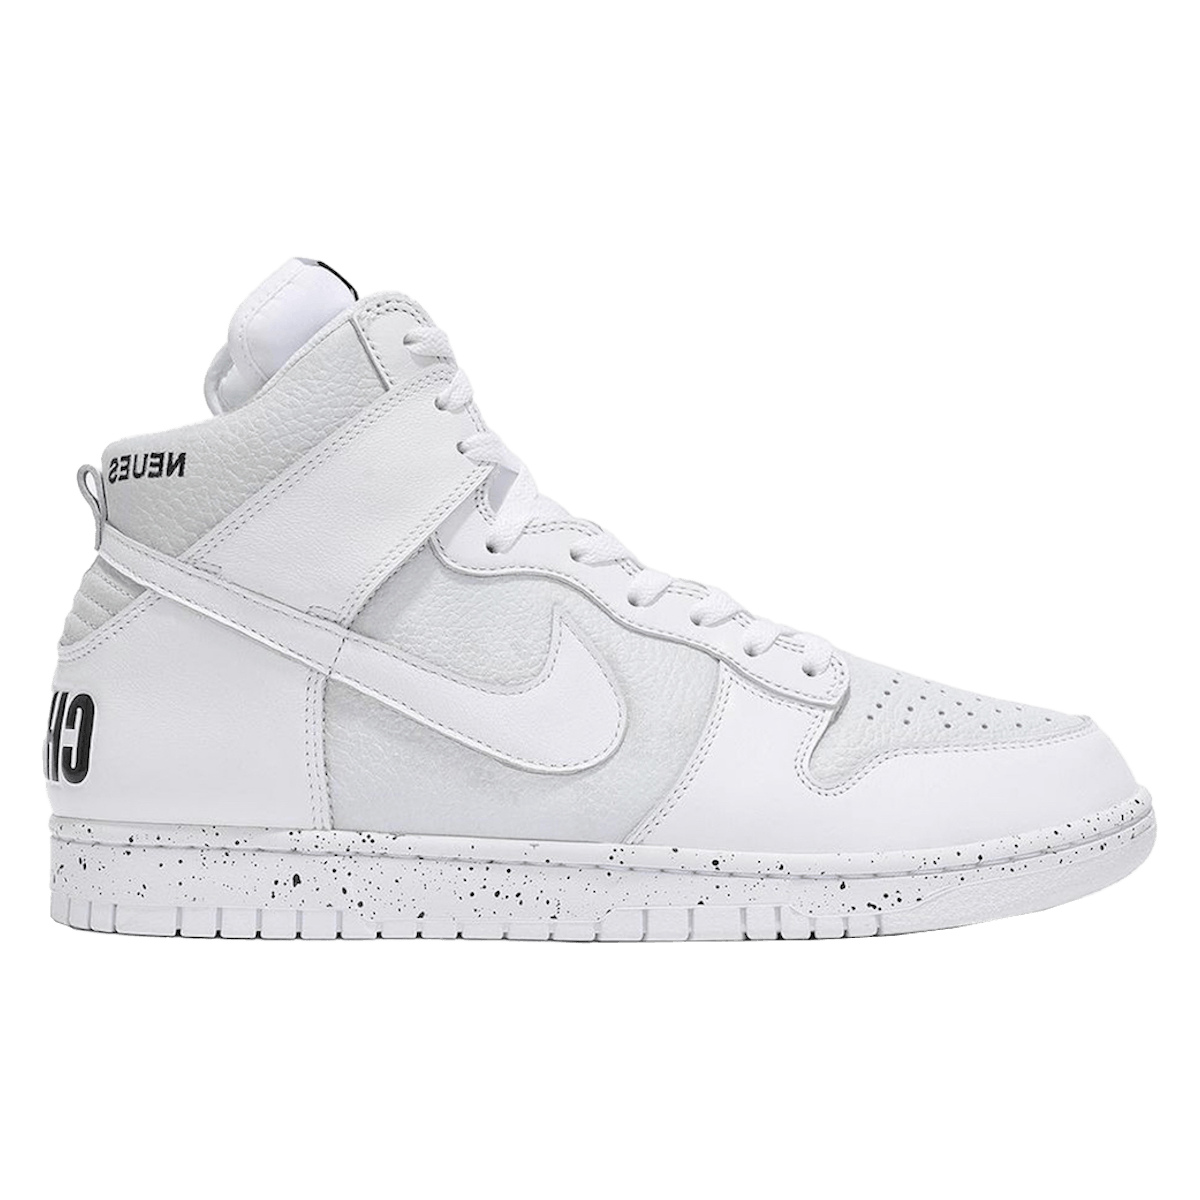 UNDERCOVER x Nike Dunk High 1985 "White"